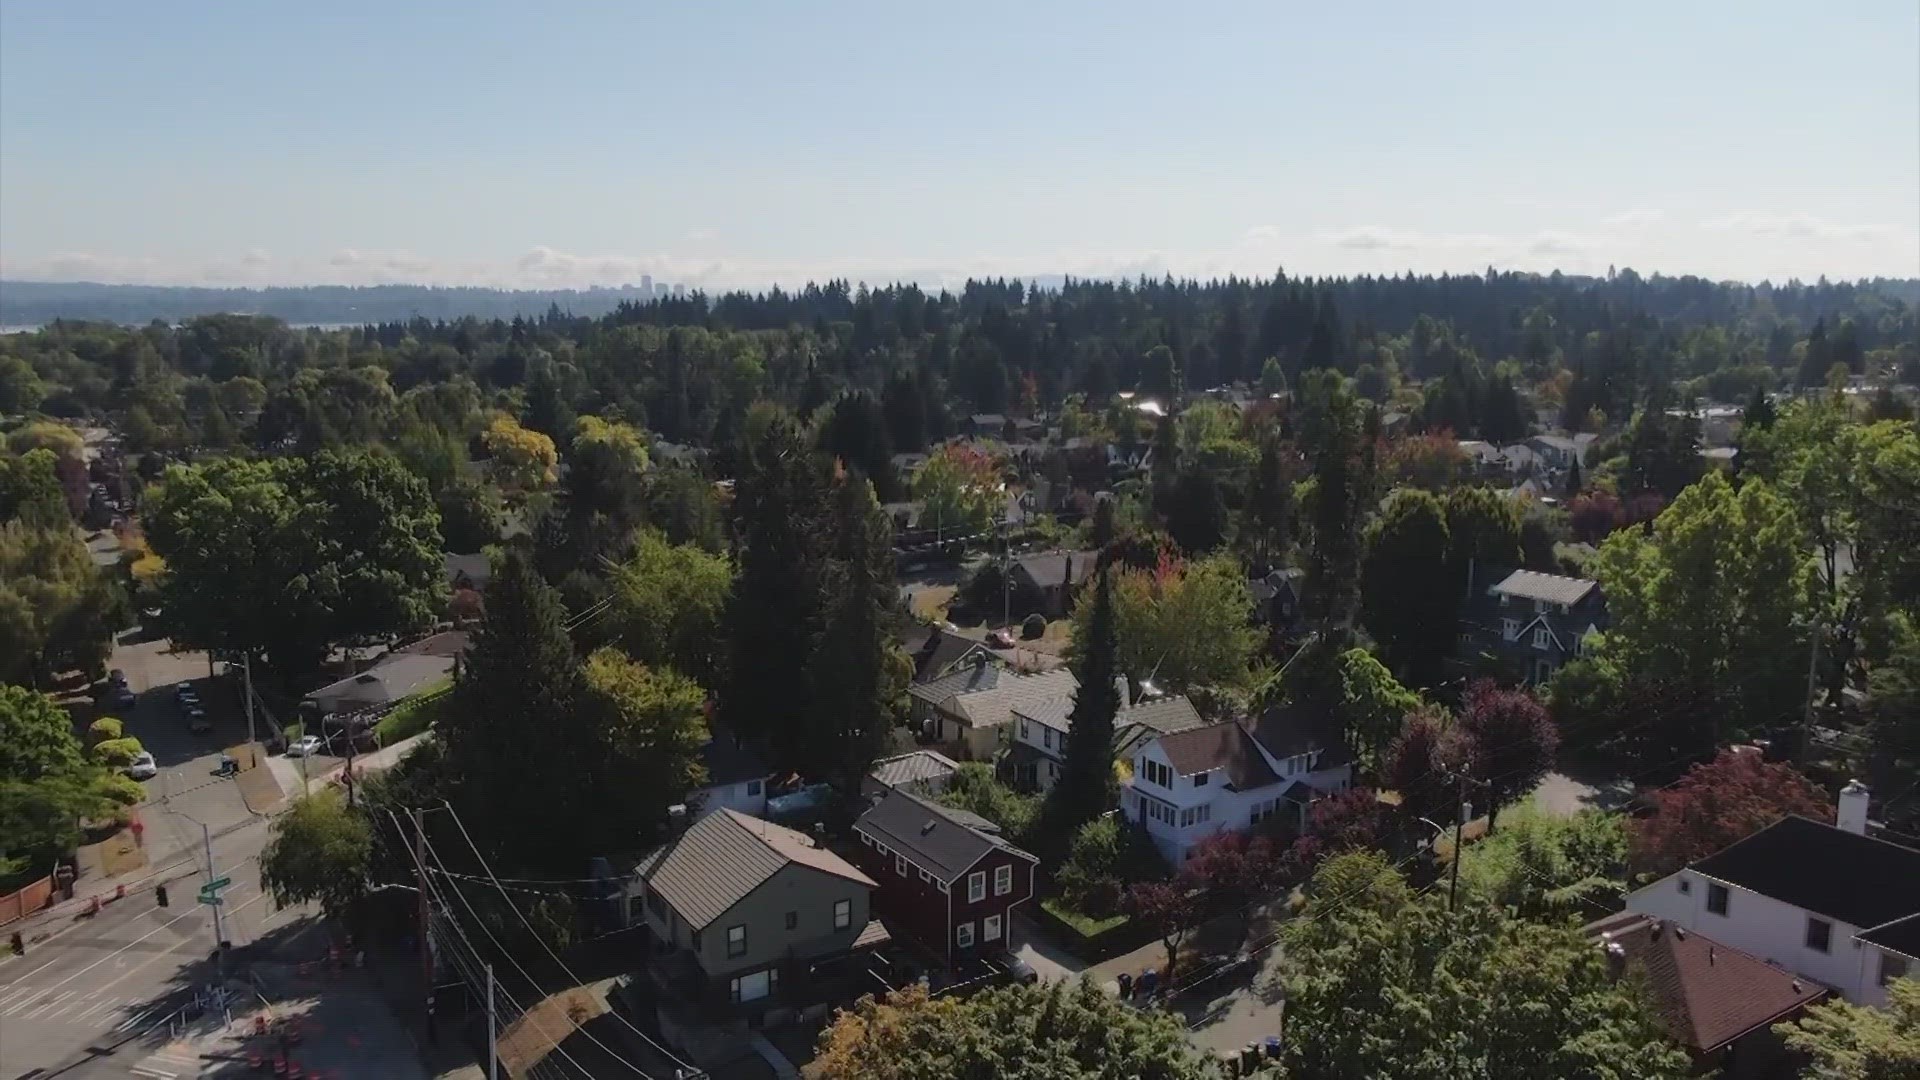 Seattle's income required to afford a median-price home is higher than any metro area in the U.S. outside of California, according to Redfin data.